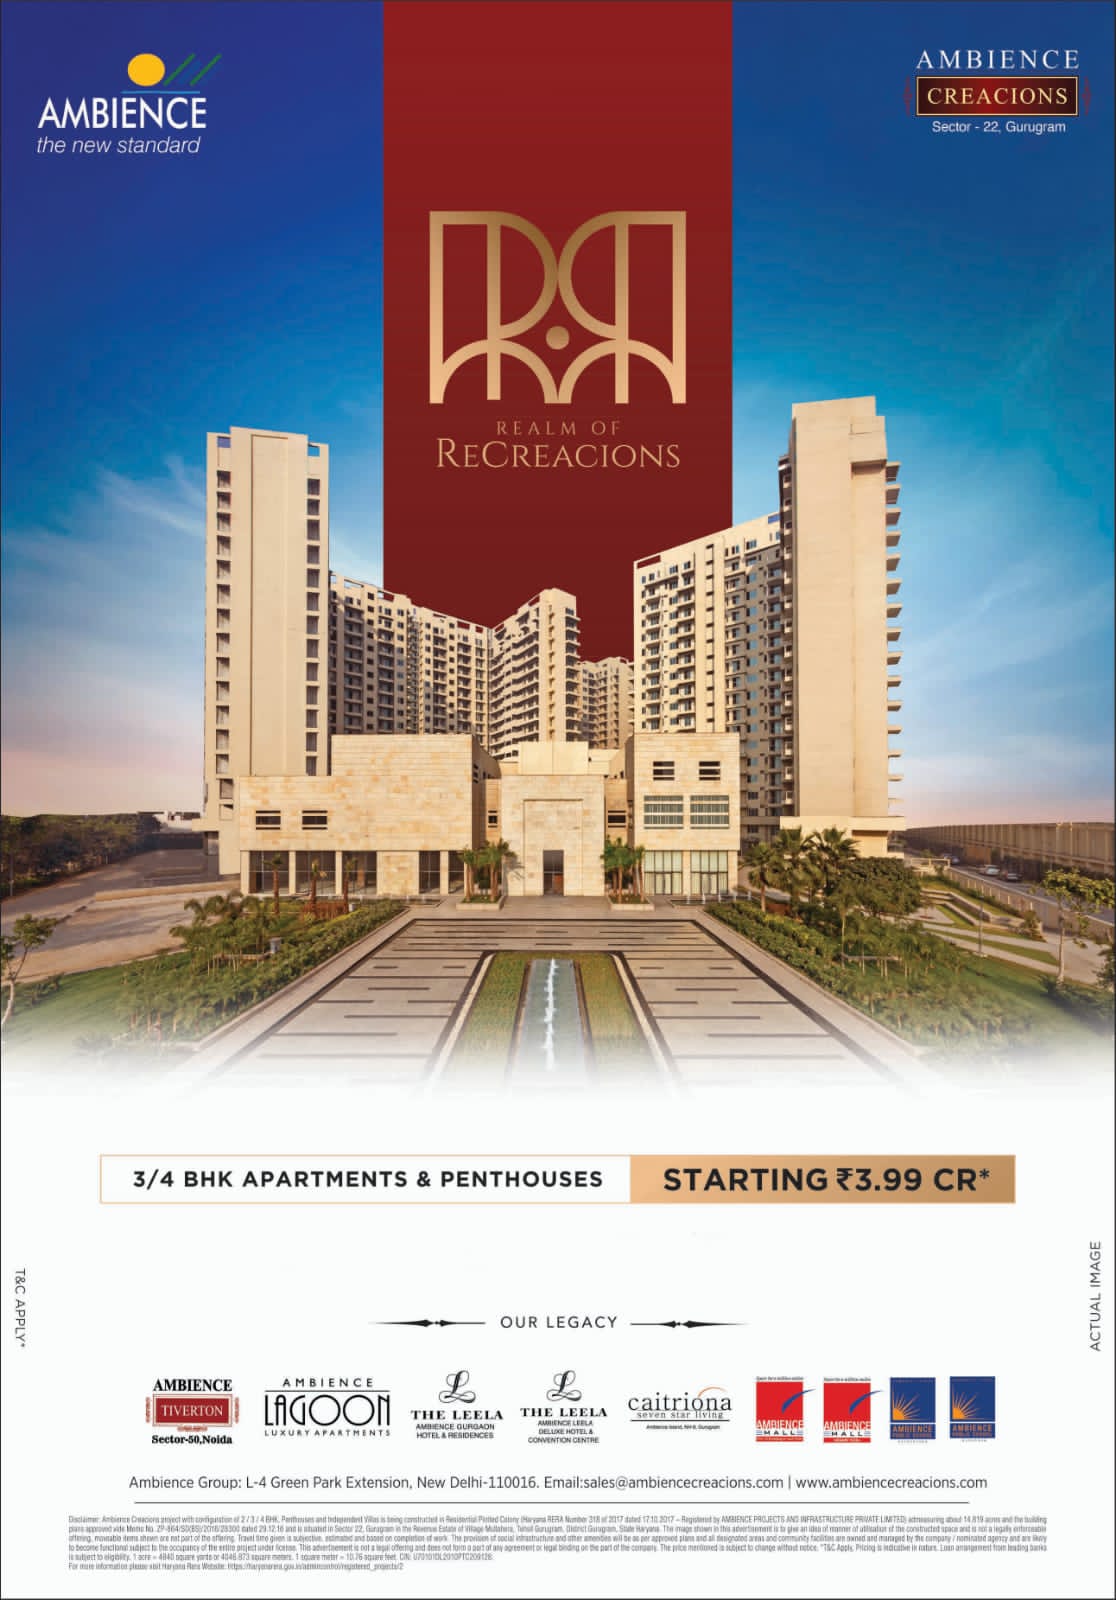 Luxurious 3 & 4 BHK apartments and penthouses starting Rs 3.99 Cr at Ambience Creacions, Gurgaon Update